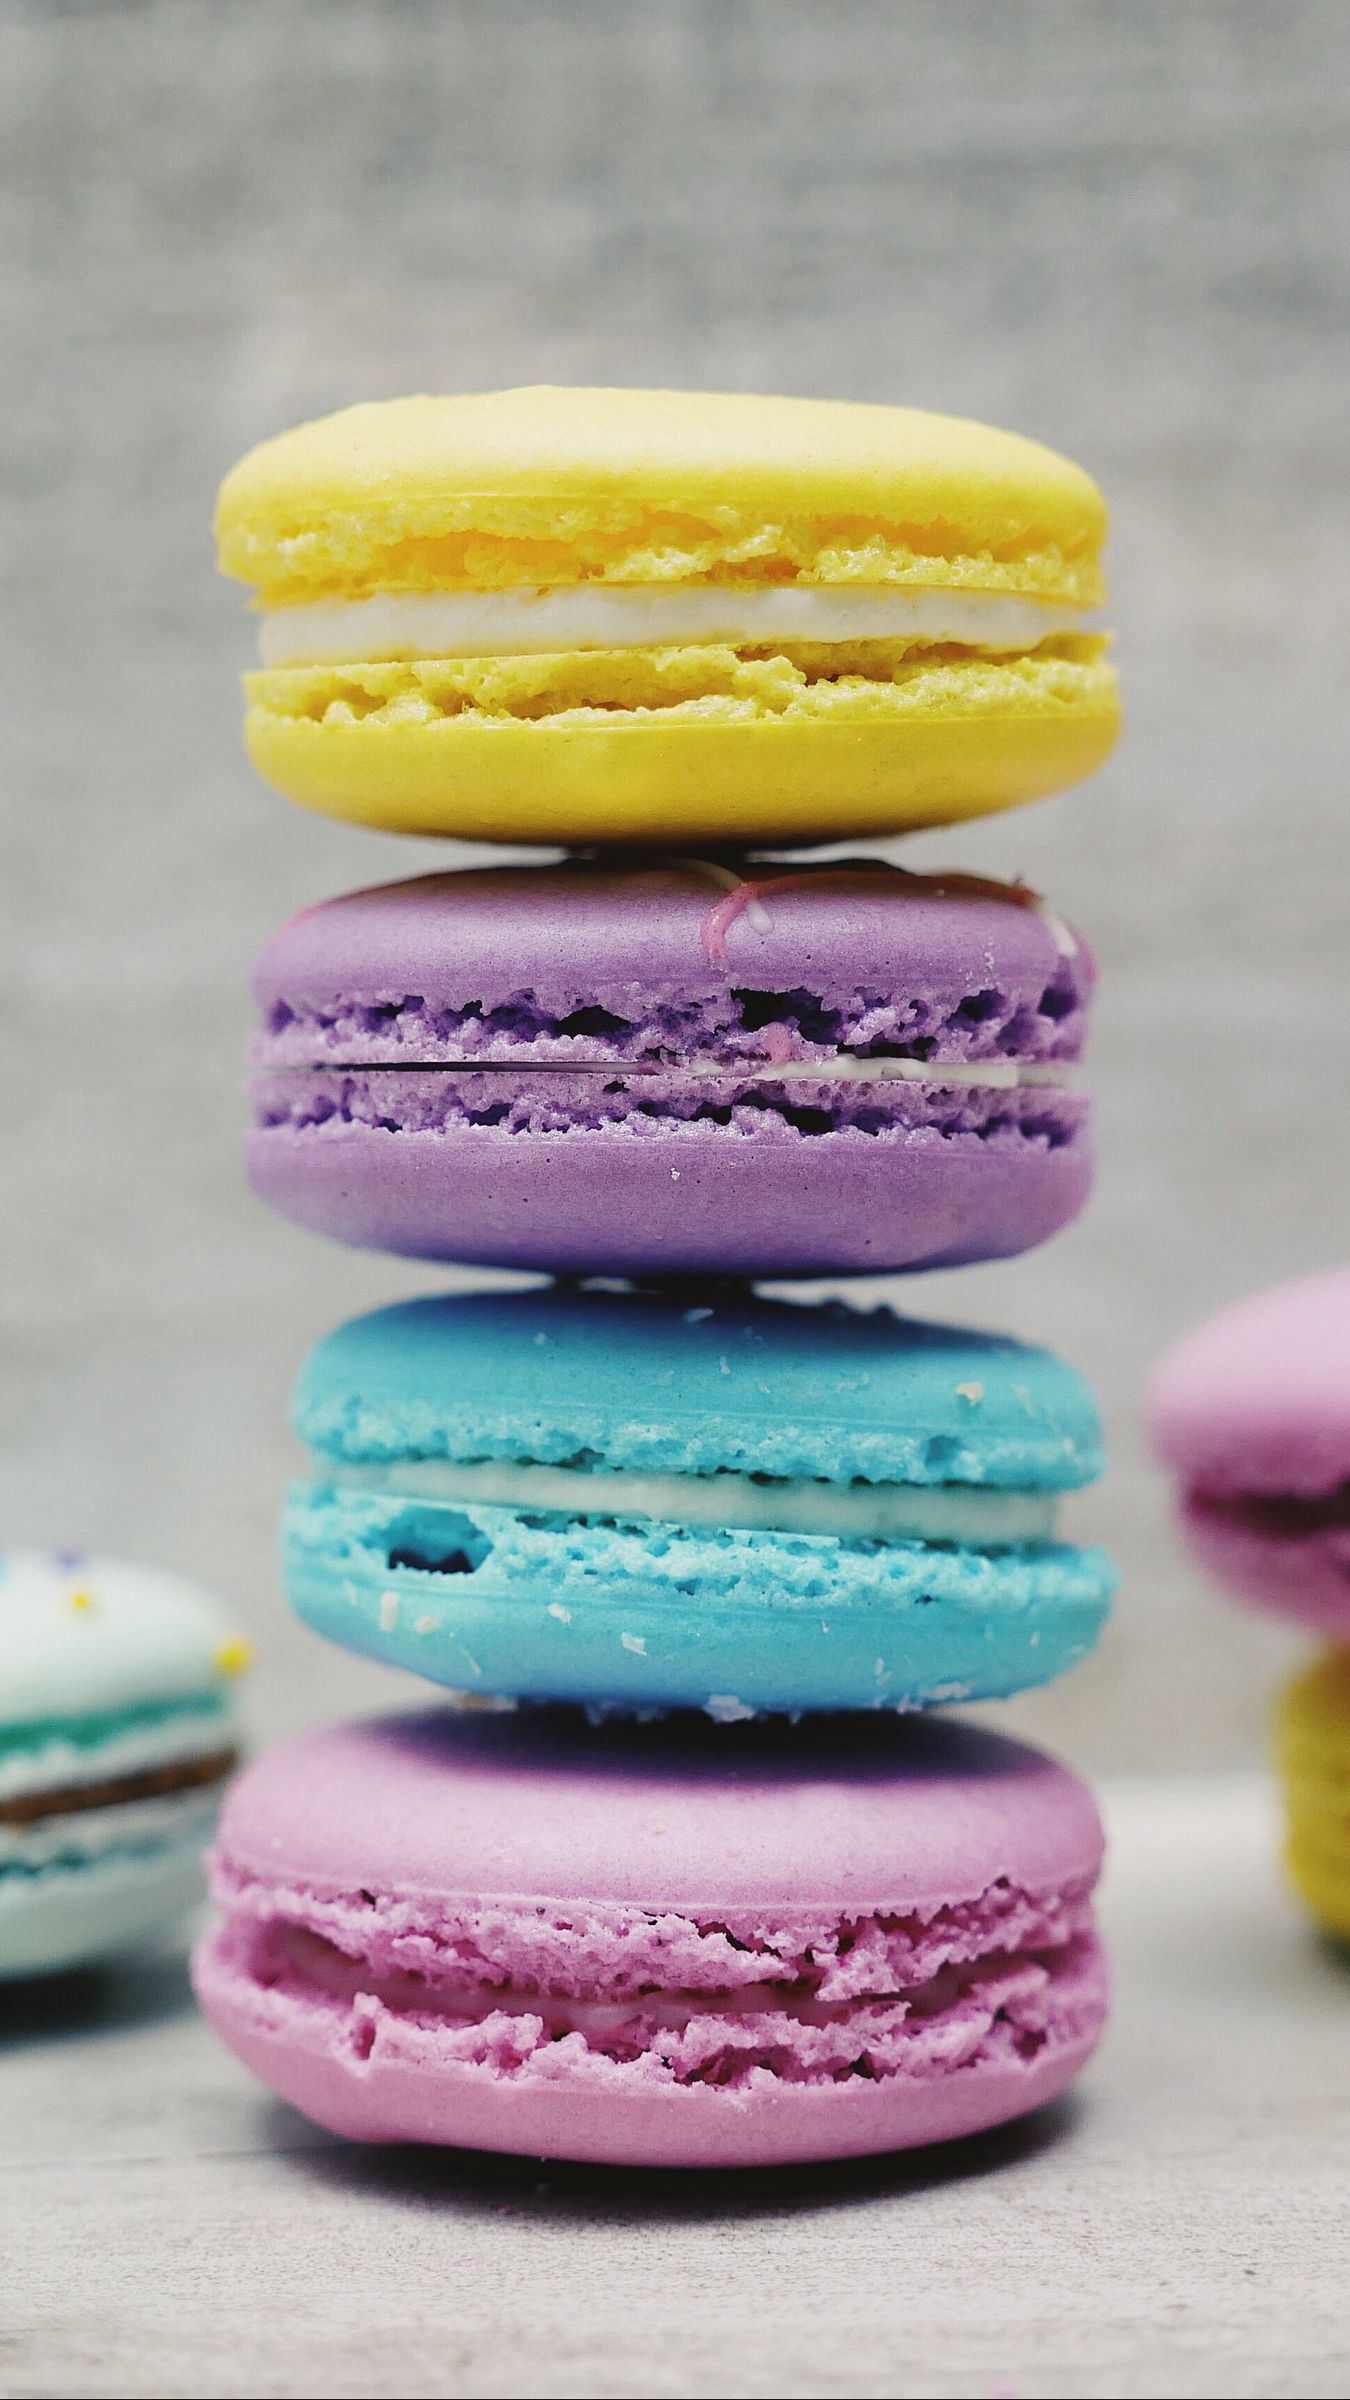 Download wallpaper x almond biscuits macaron dessert iphone s for parallax hd background